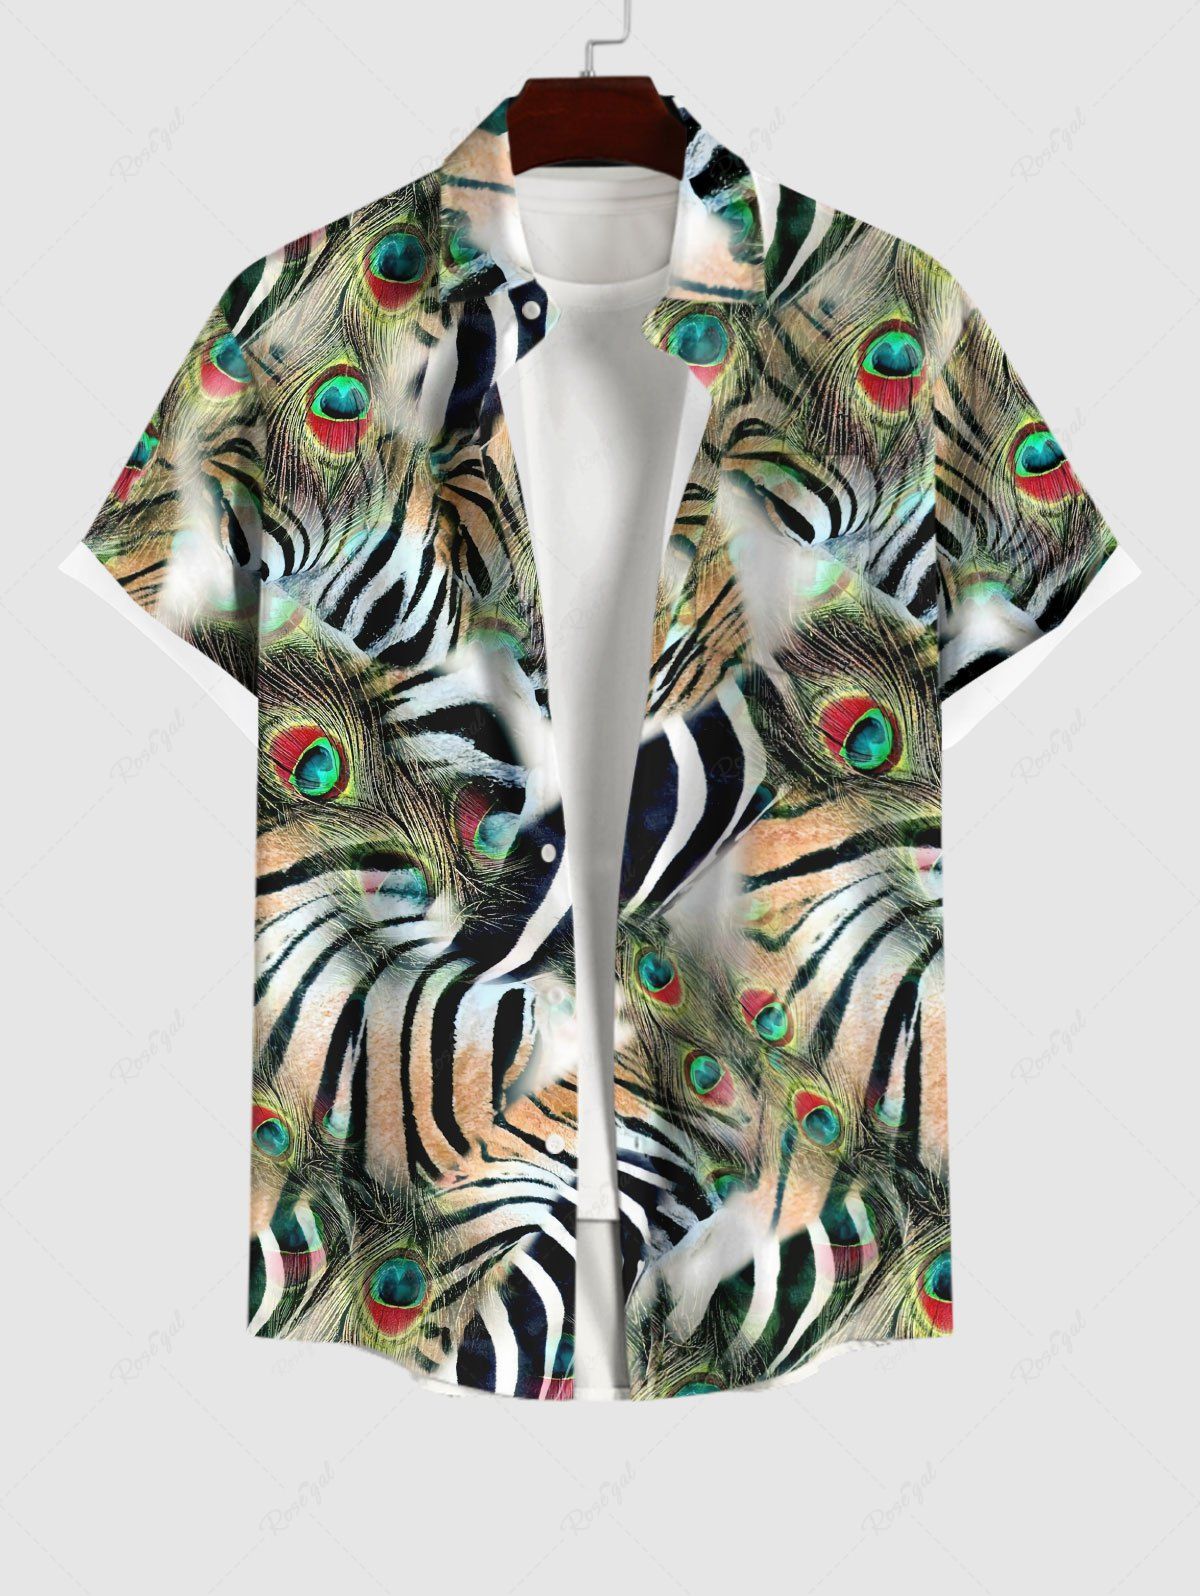 Store Hawaii Plus Size Turn-down Collar Peacock Feather Tiger Zebra Striped Print Button Pocket Shirt For Men  